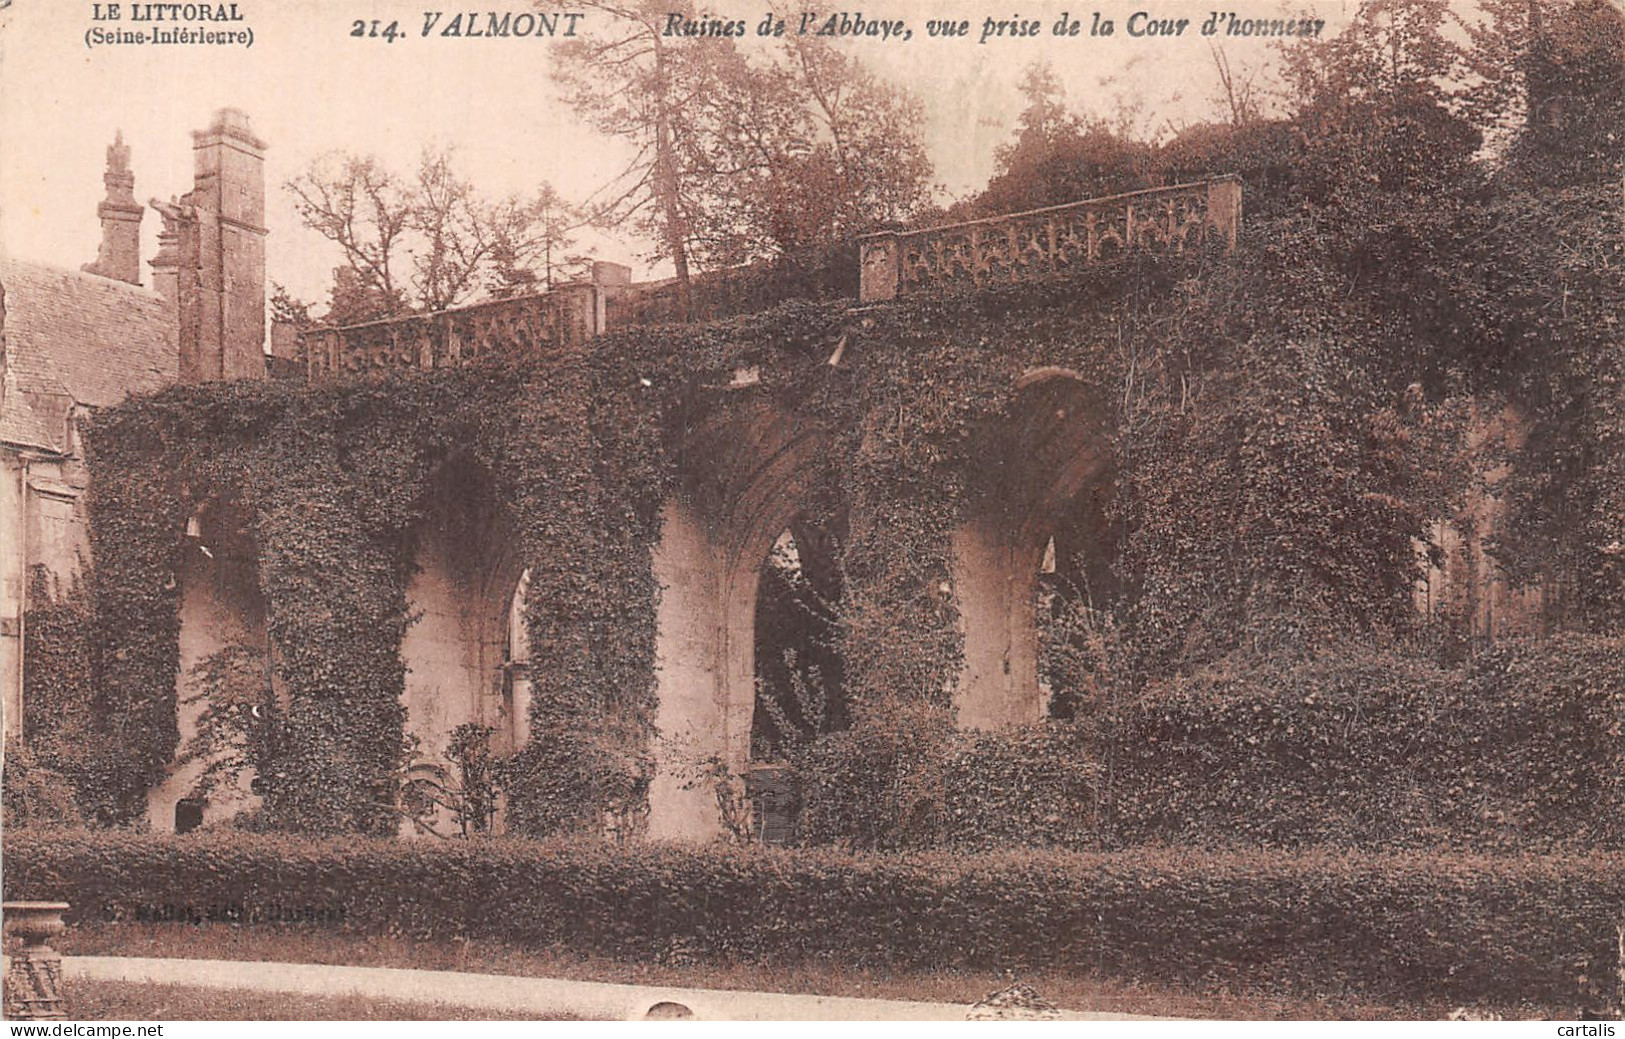 76-VALMONT RUINES DE L ABBAYE-N°4470-H/0021 - Valmont